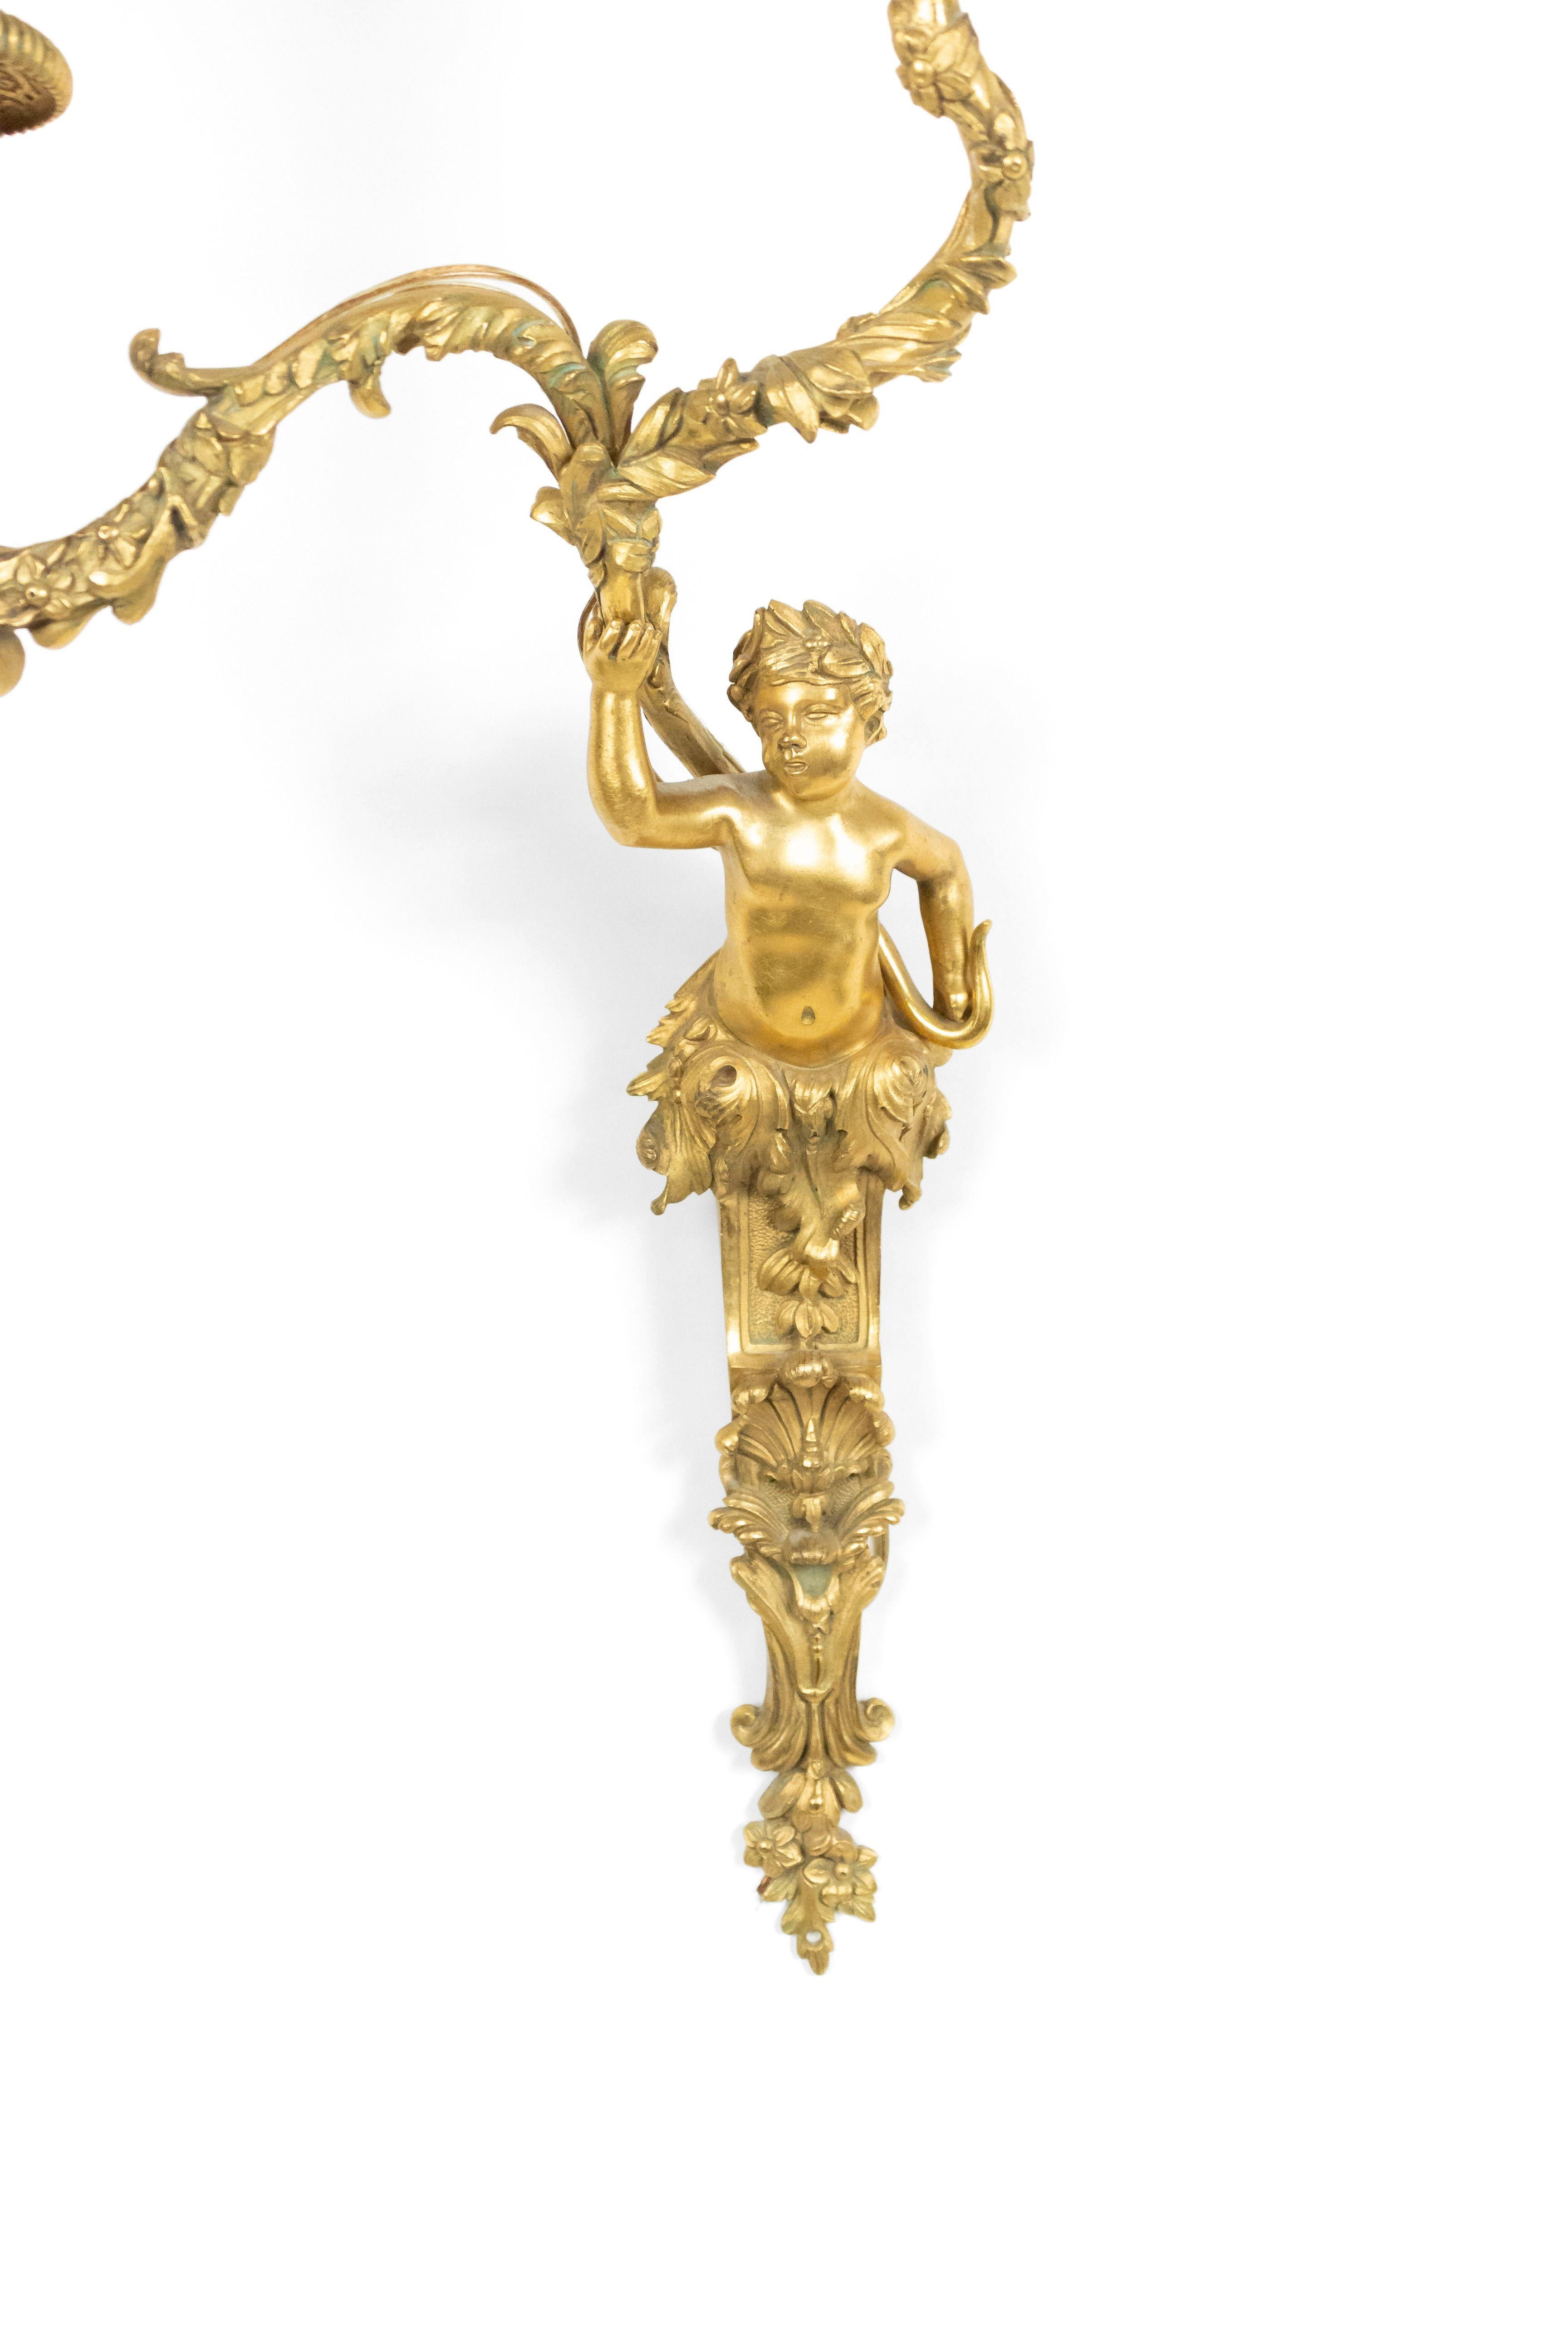 Pair of French Louis XV-style (20th Century) bronze dore wall sconces with two foliage-decorated arms supported by a cherub figure. (PRICED AS PAIR).
 